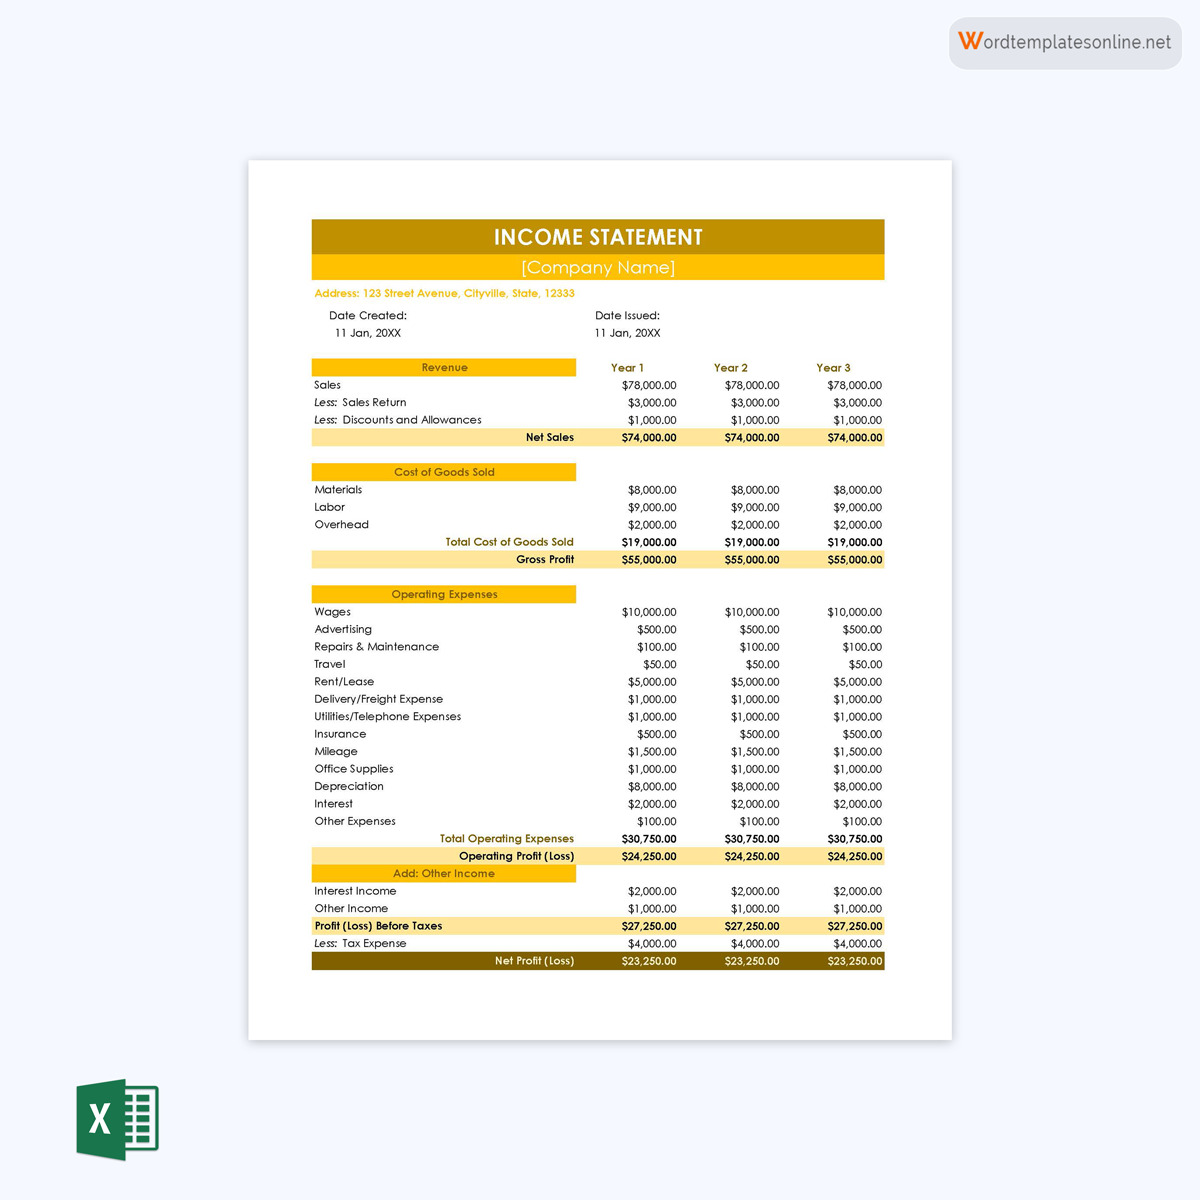 Great Customizable General Income Statement Sample 06 as Excel Sheet